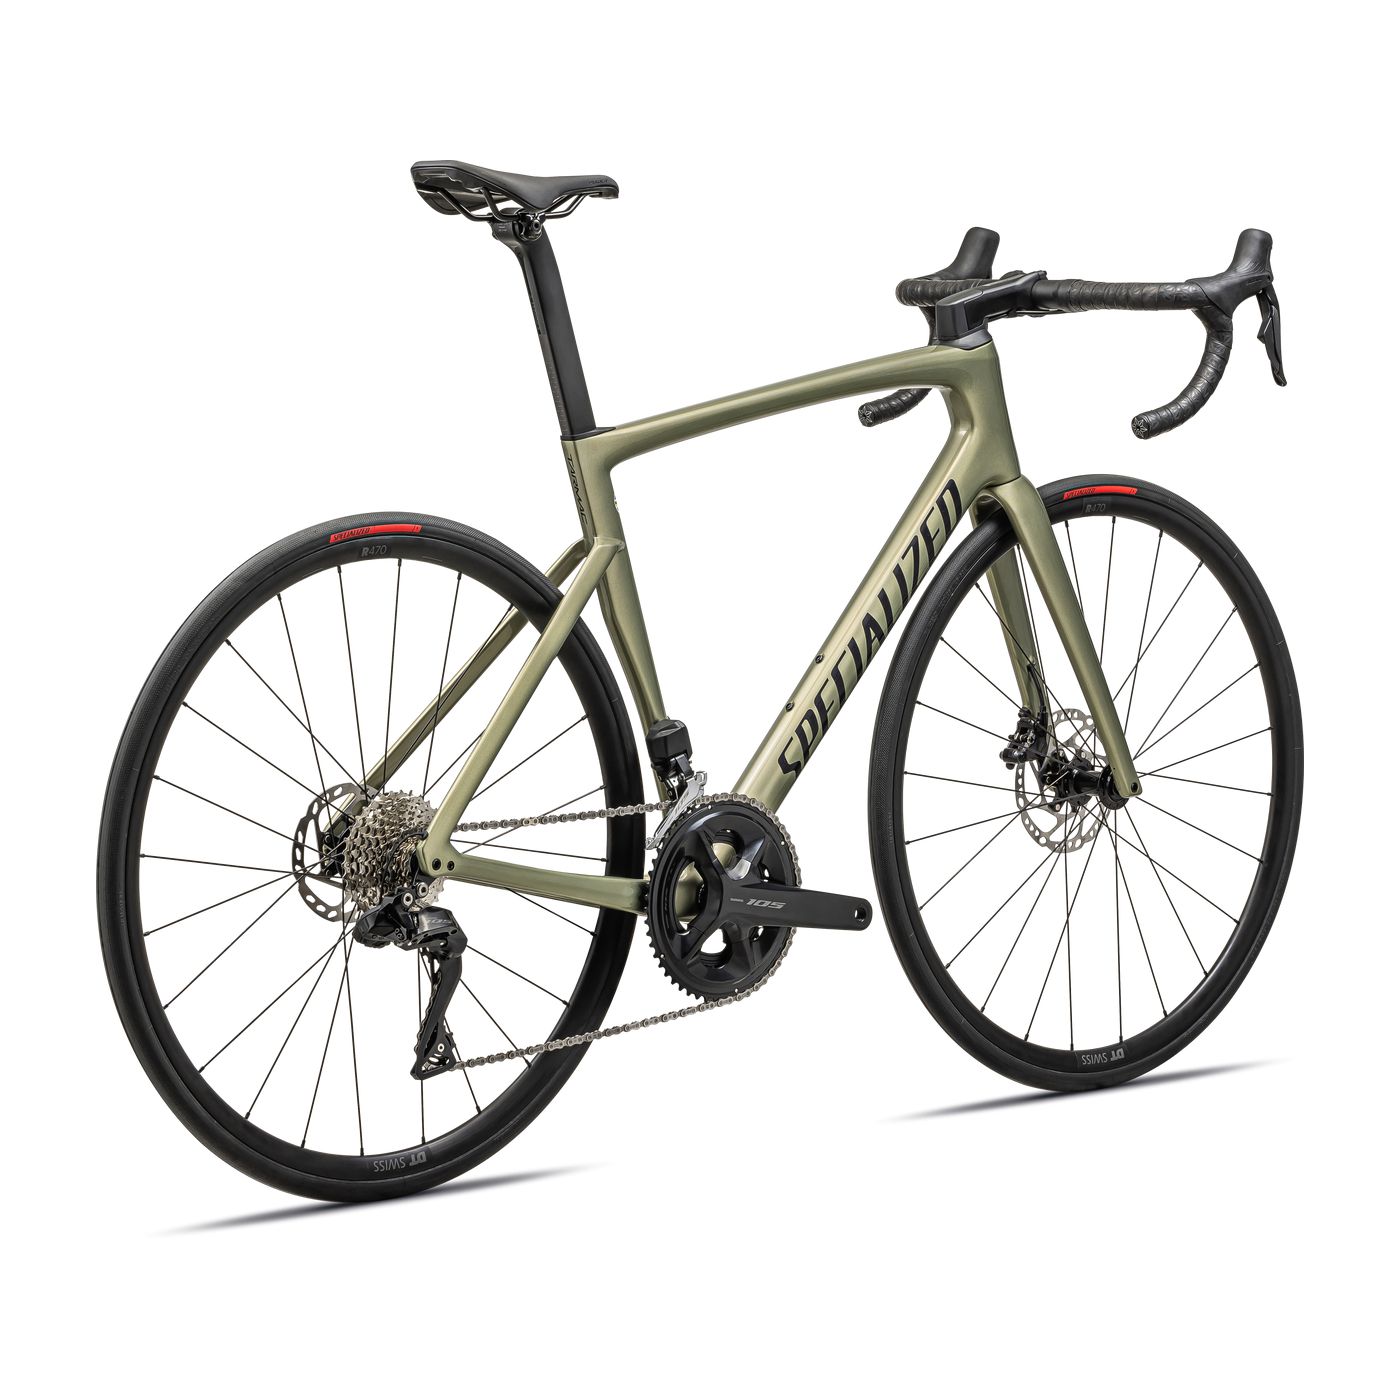 Specialized Tarmac SL7 Comp - Shimano 105 Di2 - Bikes - Road - Bicycle Warehouse